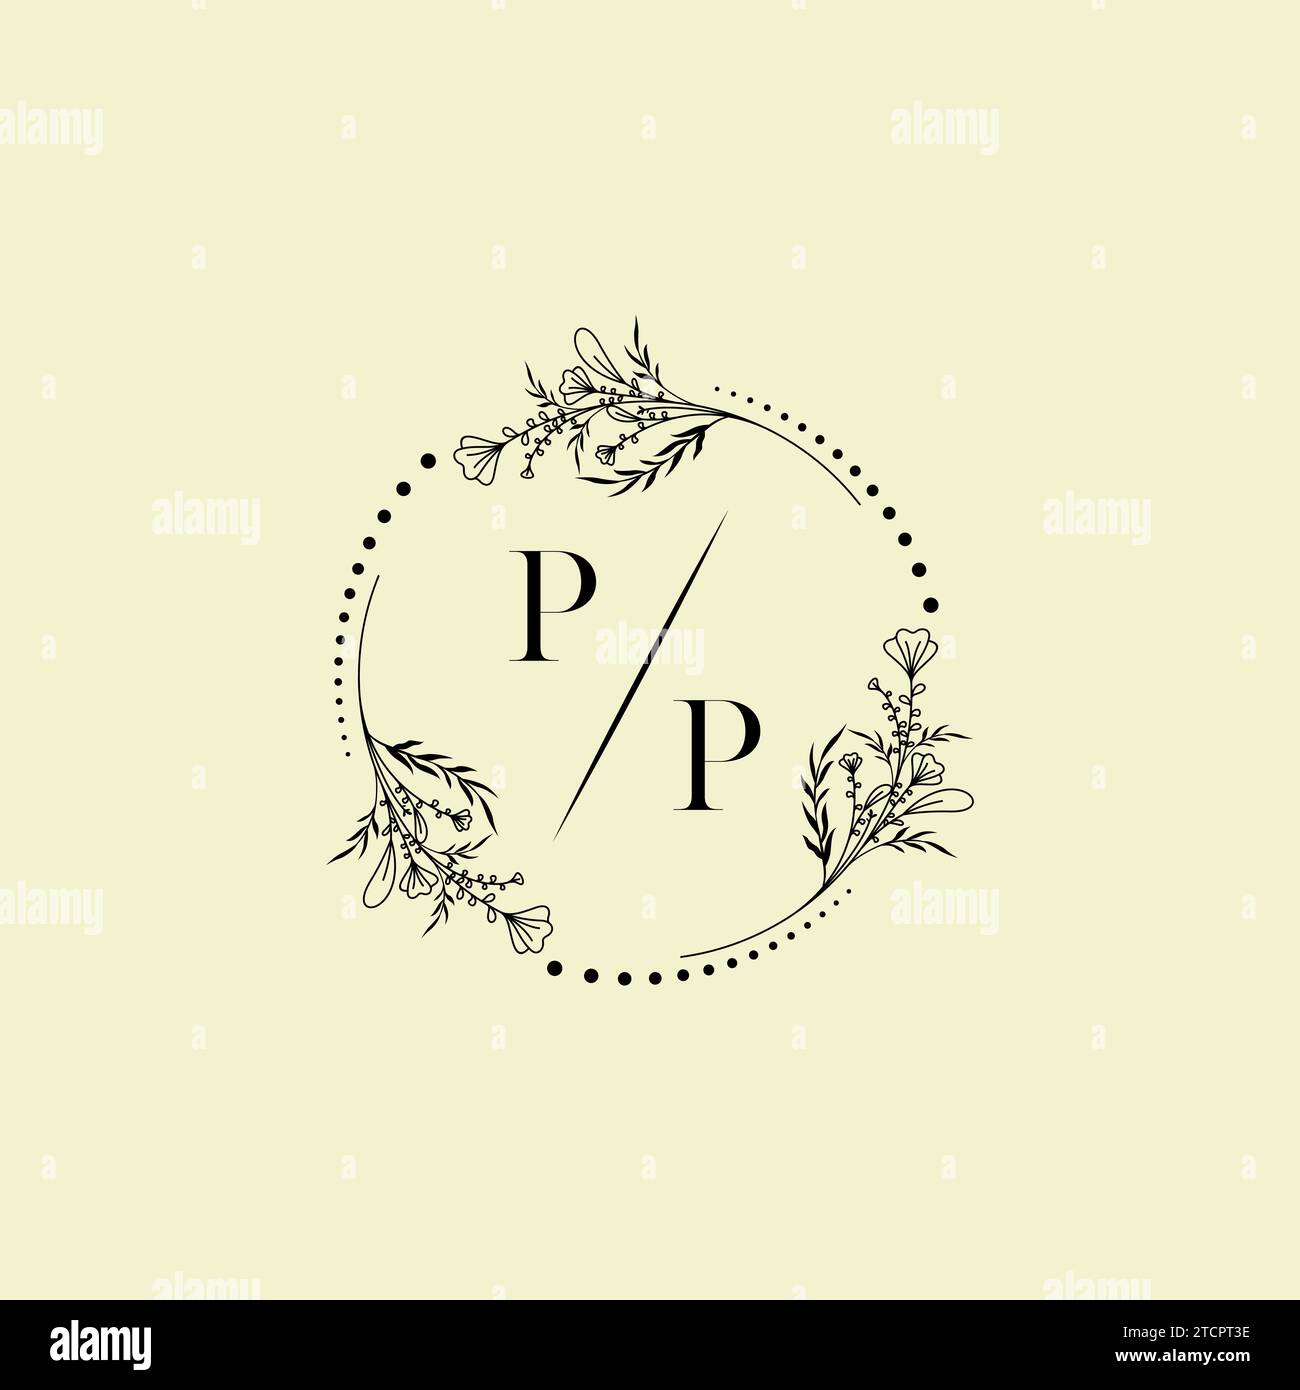 PP wedding initial logo letters in high quality professional design that will print well across any print media Stock Vector